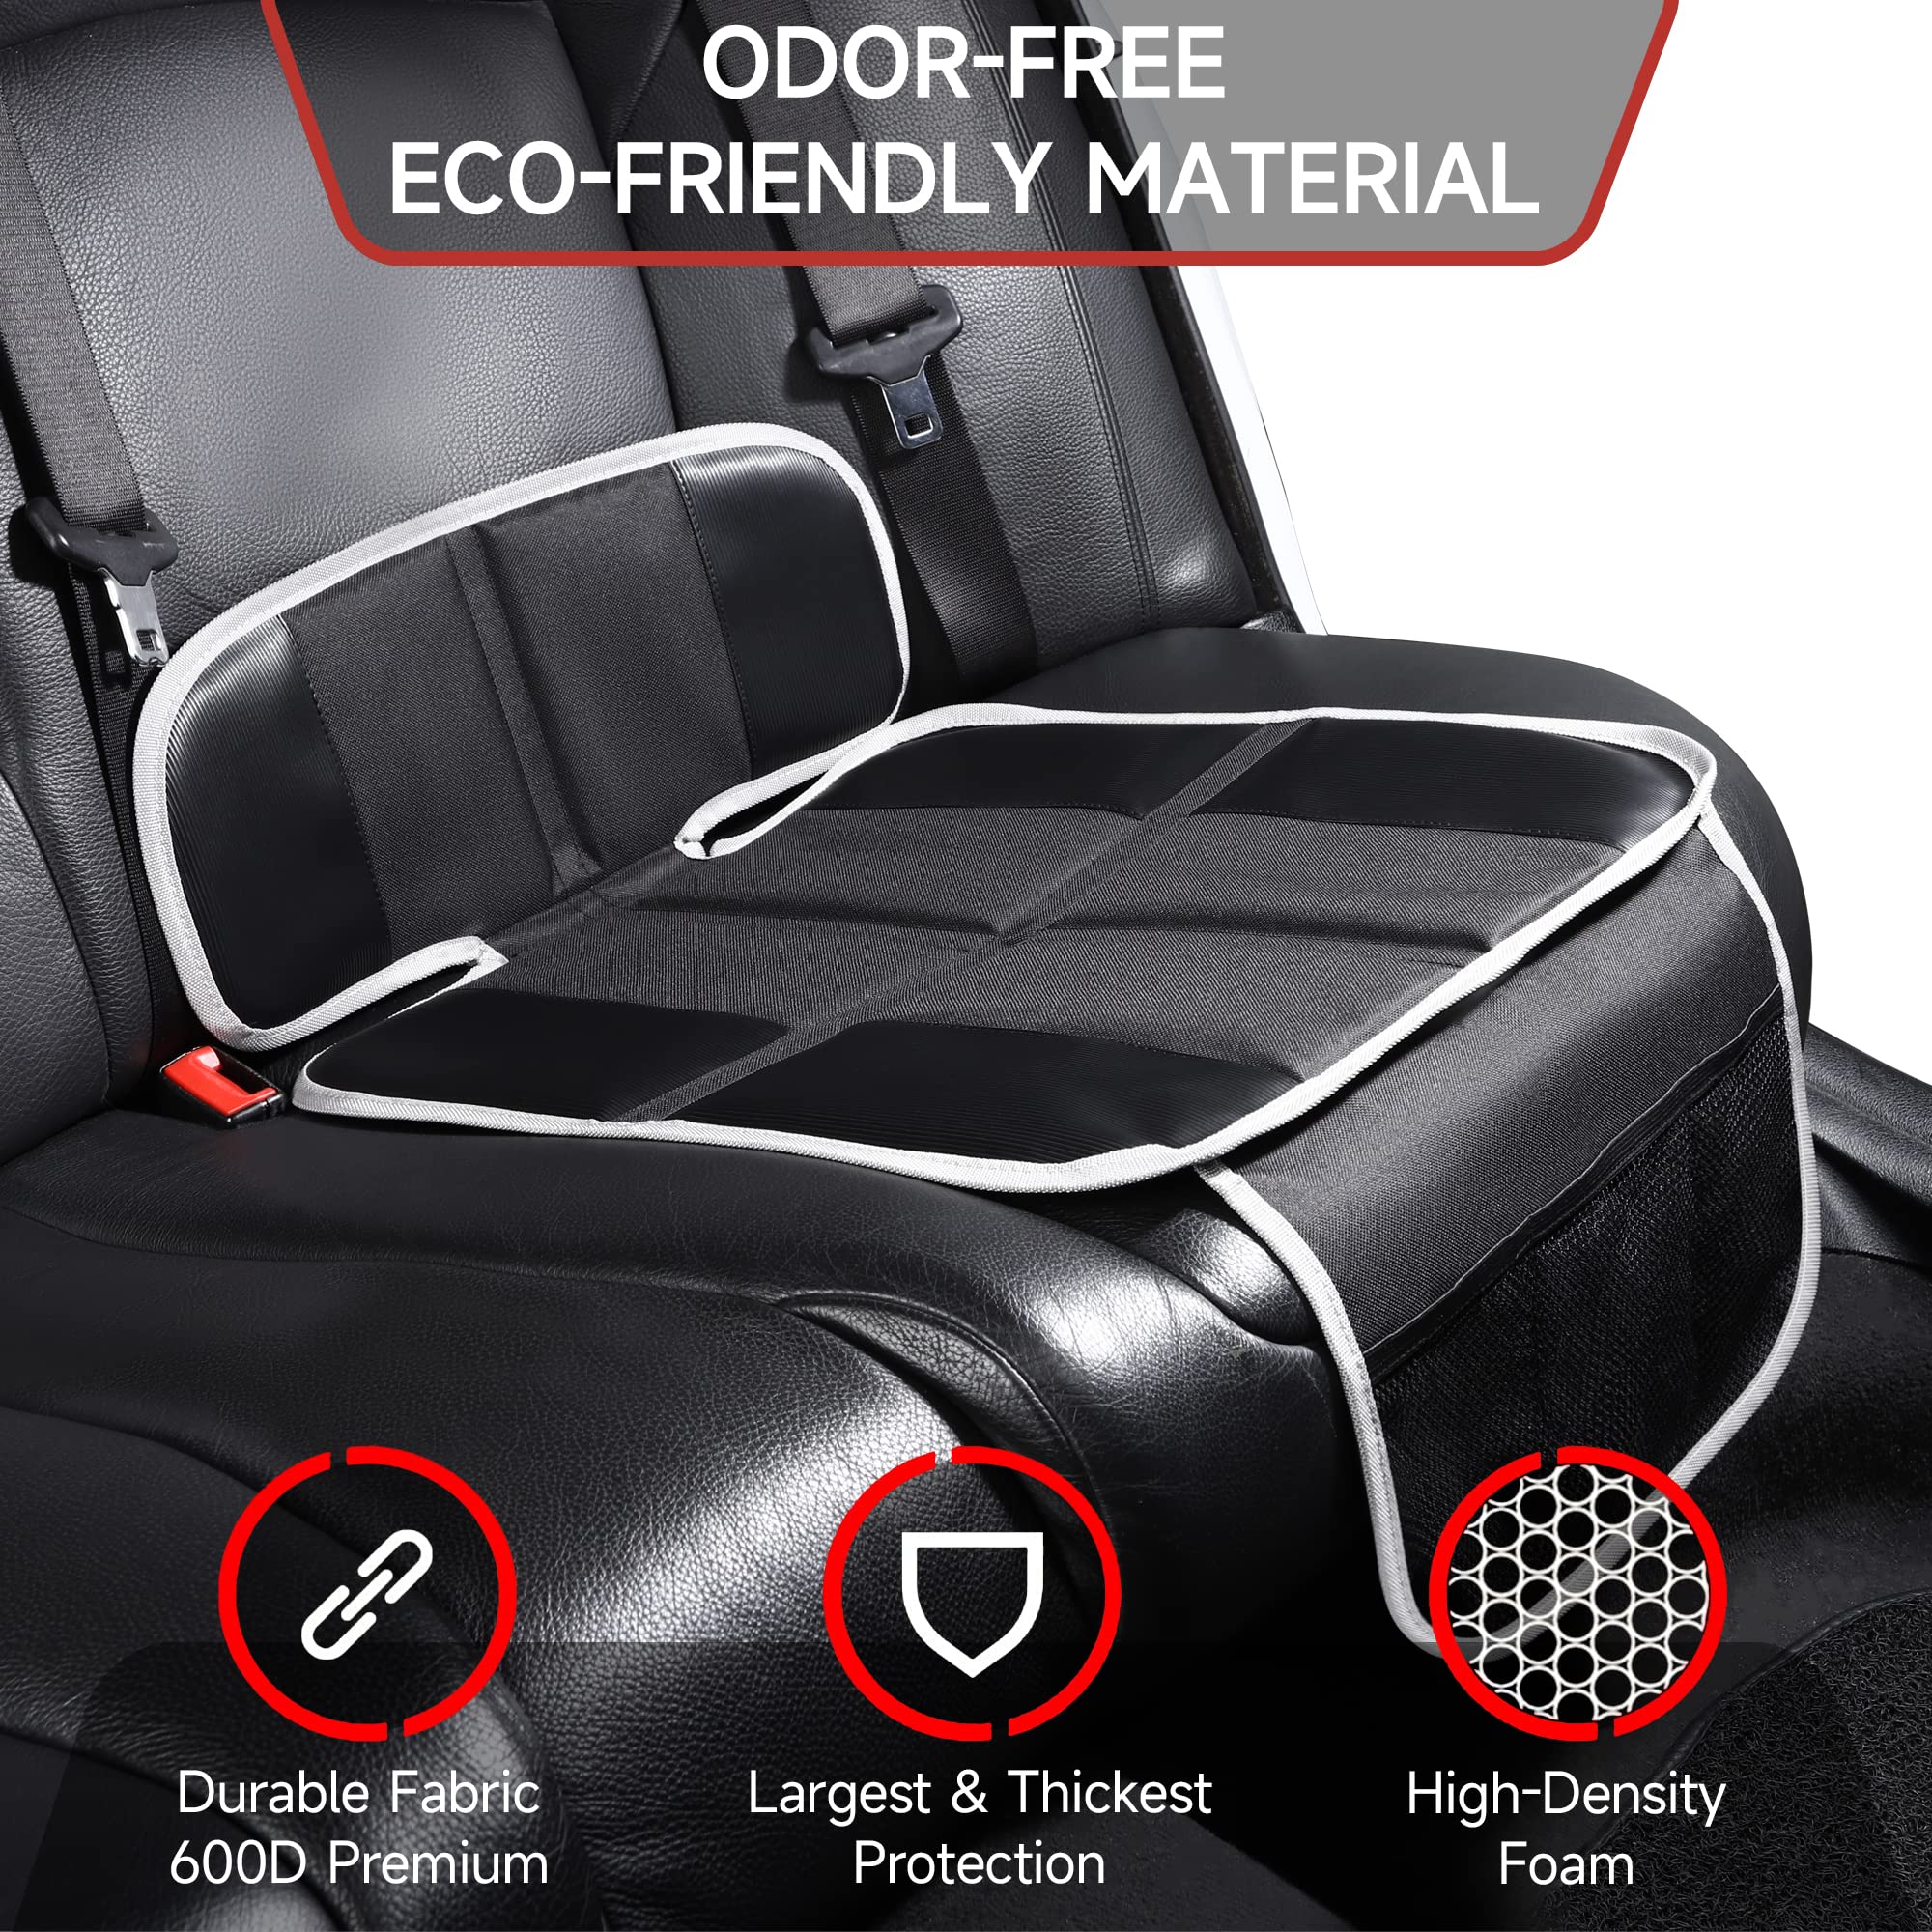 Car Seat Protector for Child Car Seat, Non-Slip Waterproof Car Seat Protector for Leather Seats with Thick Padding and Mesh Storage Pockets, Baby Seat Protectors Under Carseat